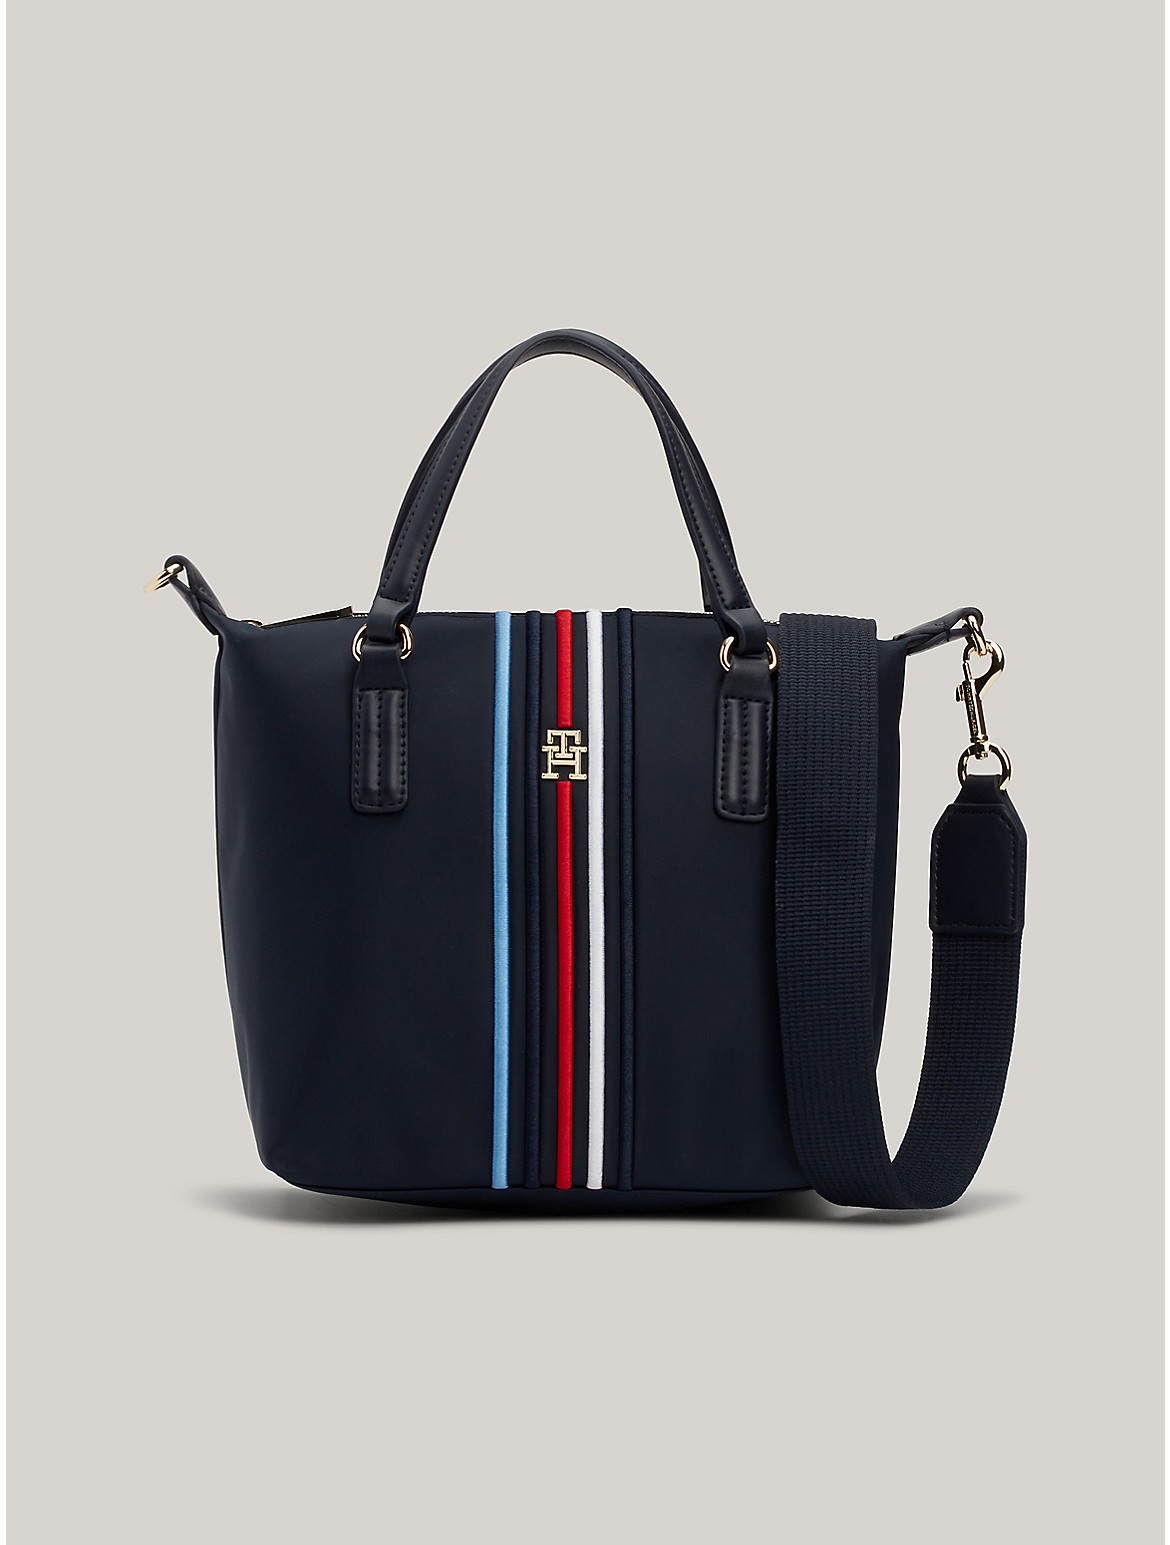 Tommy Hilfiger Women's TH Stripe Small Tote